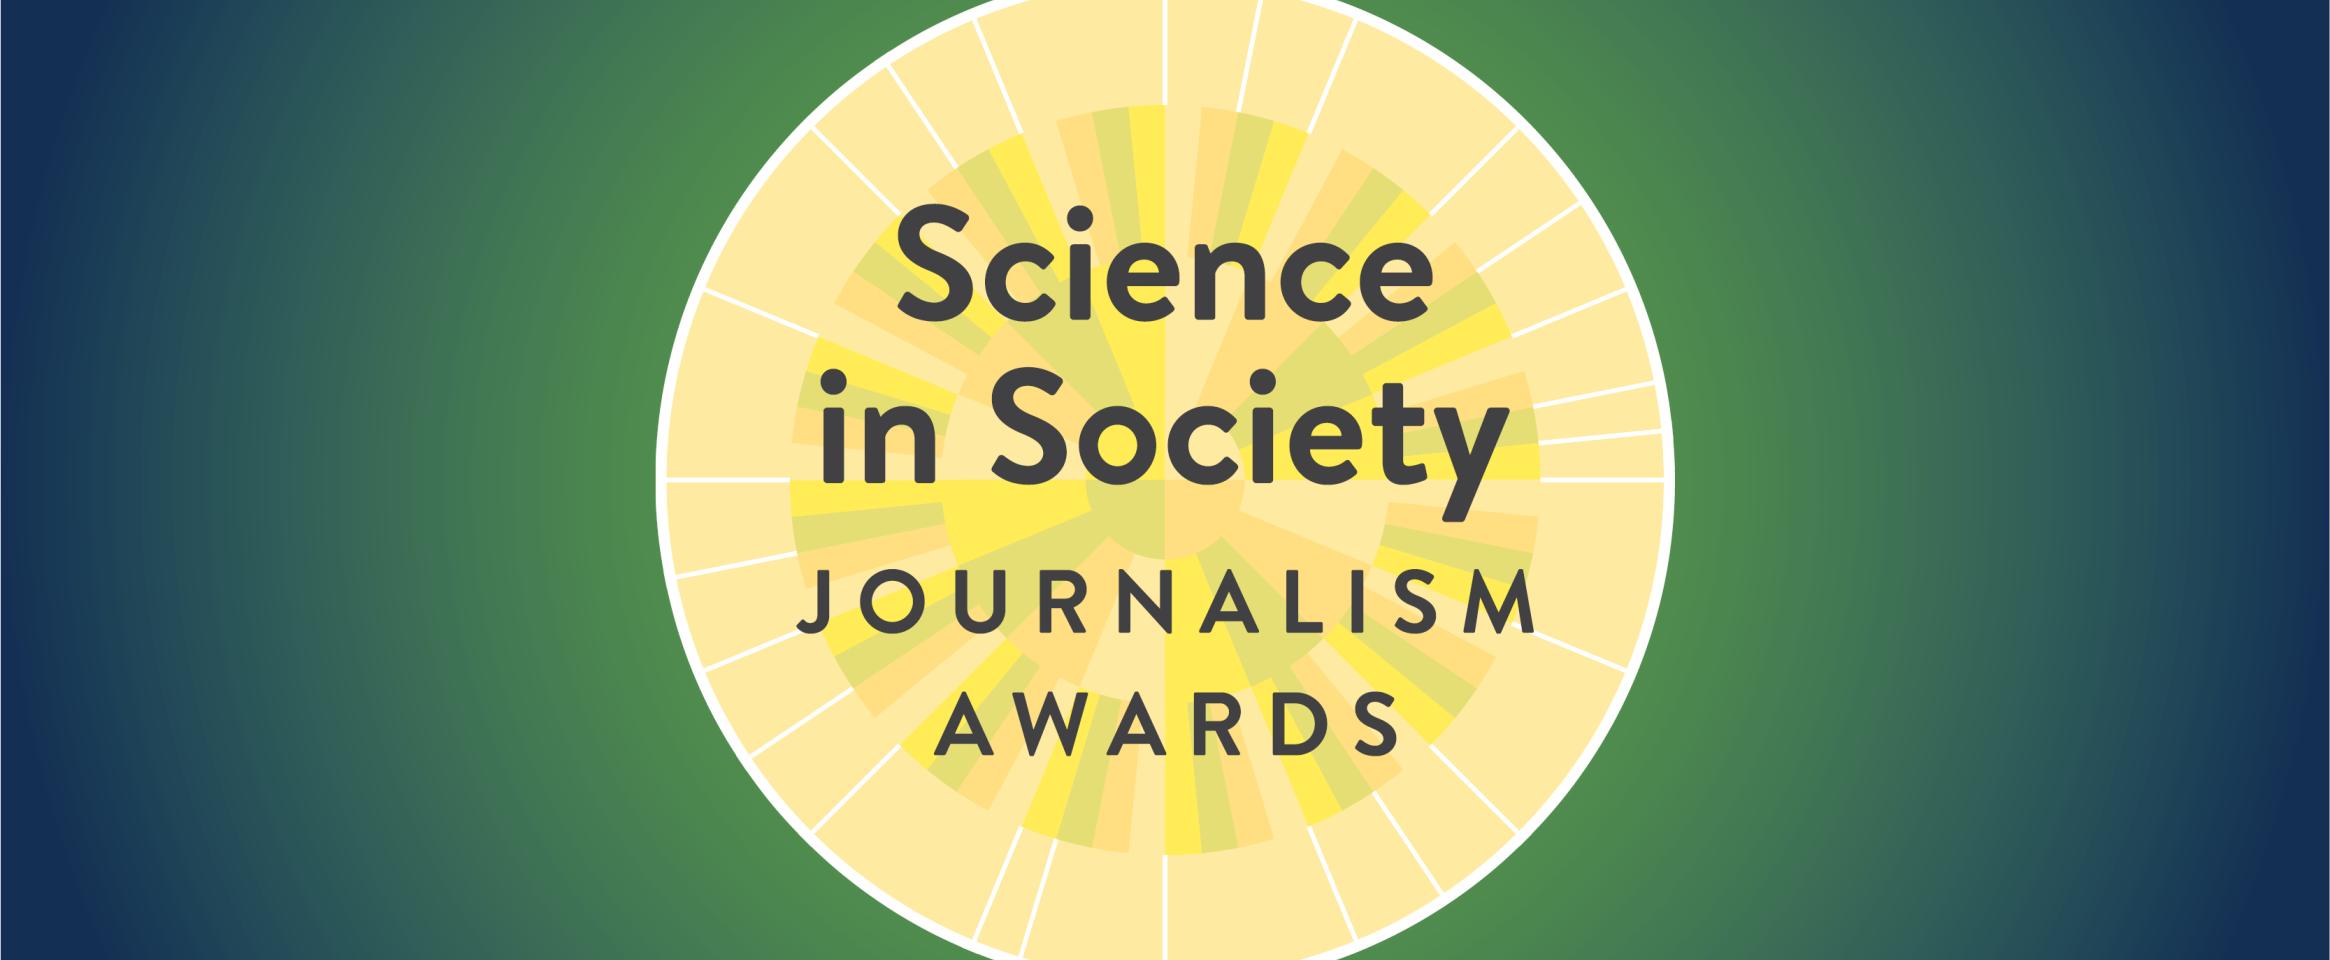 Logomark of the N A S W Science in Society Journalism Awards, a round medallion motif nested within a radiant gradient background.